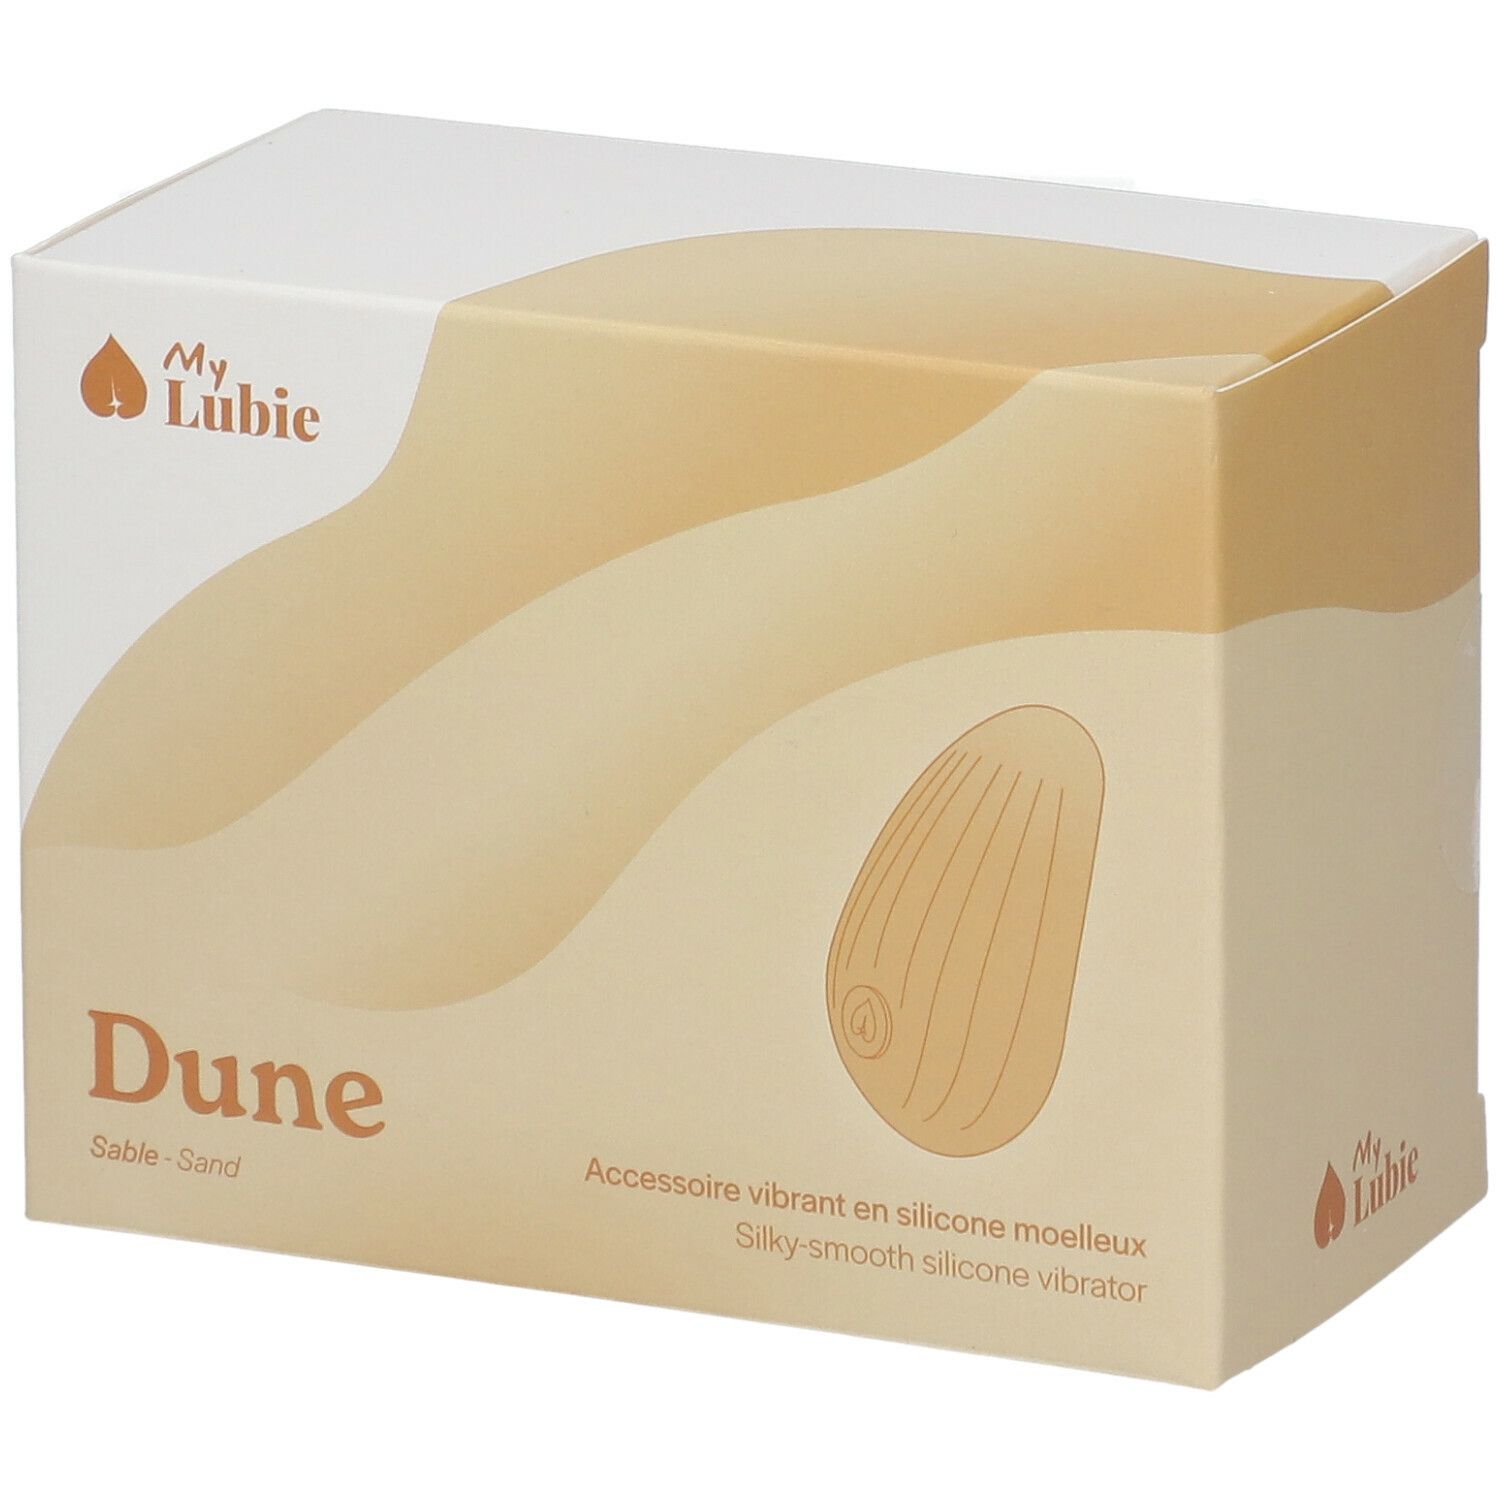 My Lubie Dune, vibromasseur silicone sable 1 pc(s) - Redcare Pharmacie